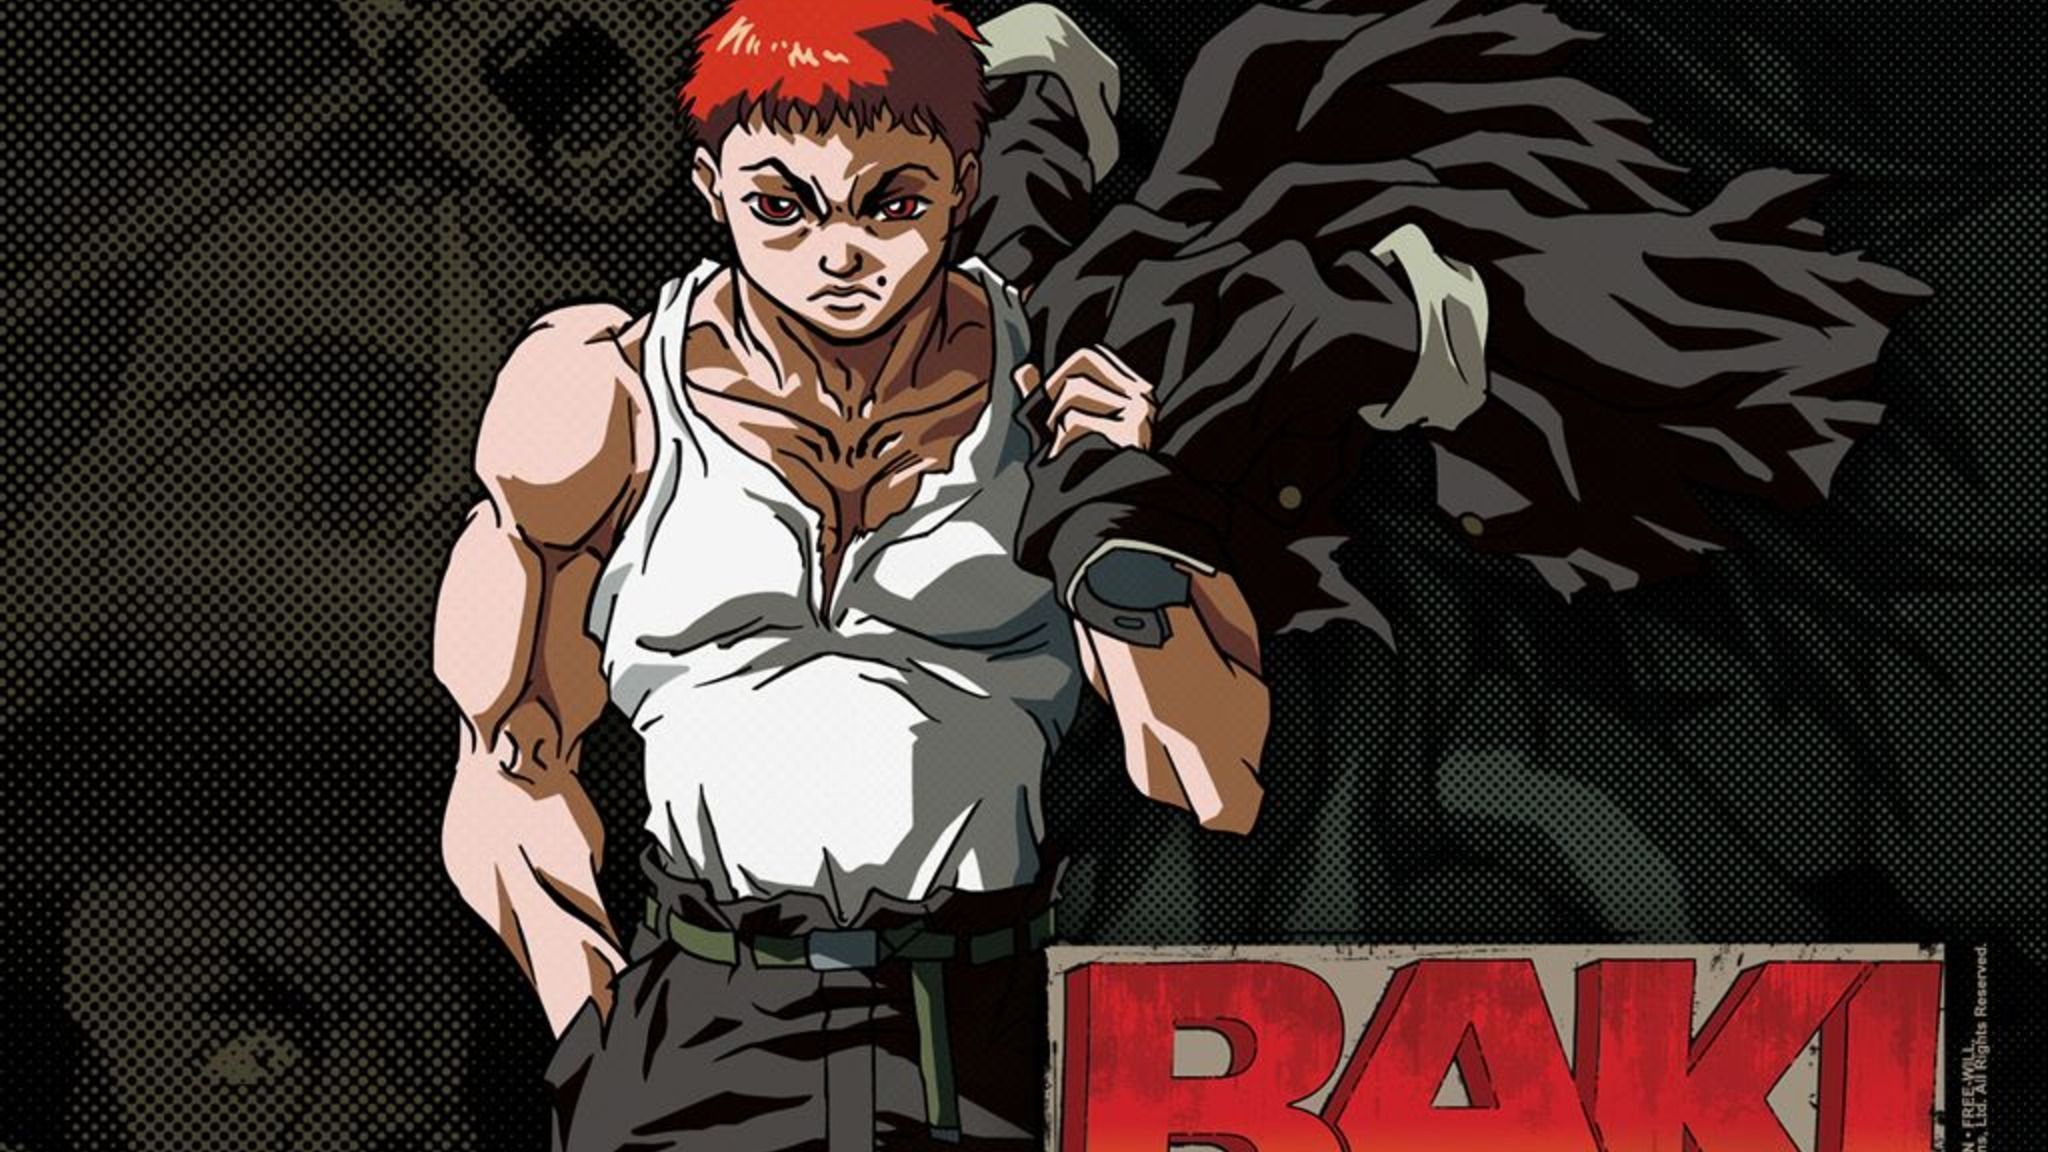 Baki the Grappler: Tv Perfect Collection Part 1 - 1 - 24 Episodes by Baki  The Grappler Anime's Staff: Amazon.ca: Baki The Grappler Anime's Staff:  Movies & TV Shows